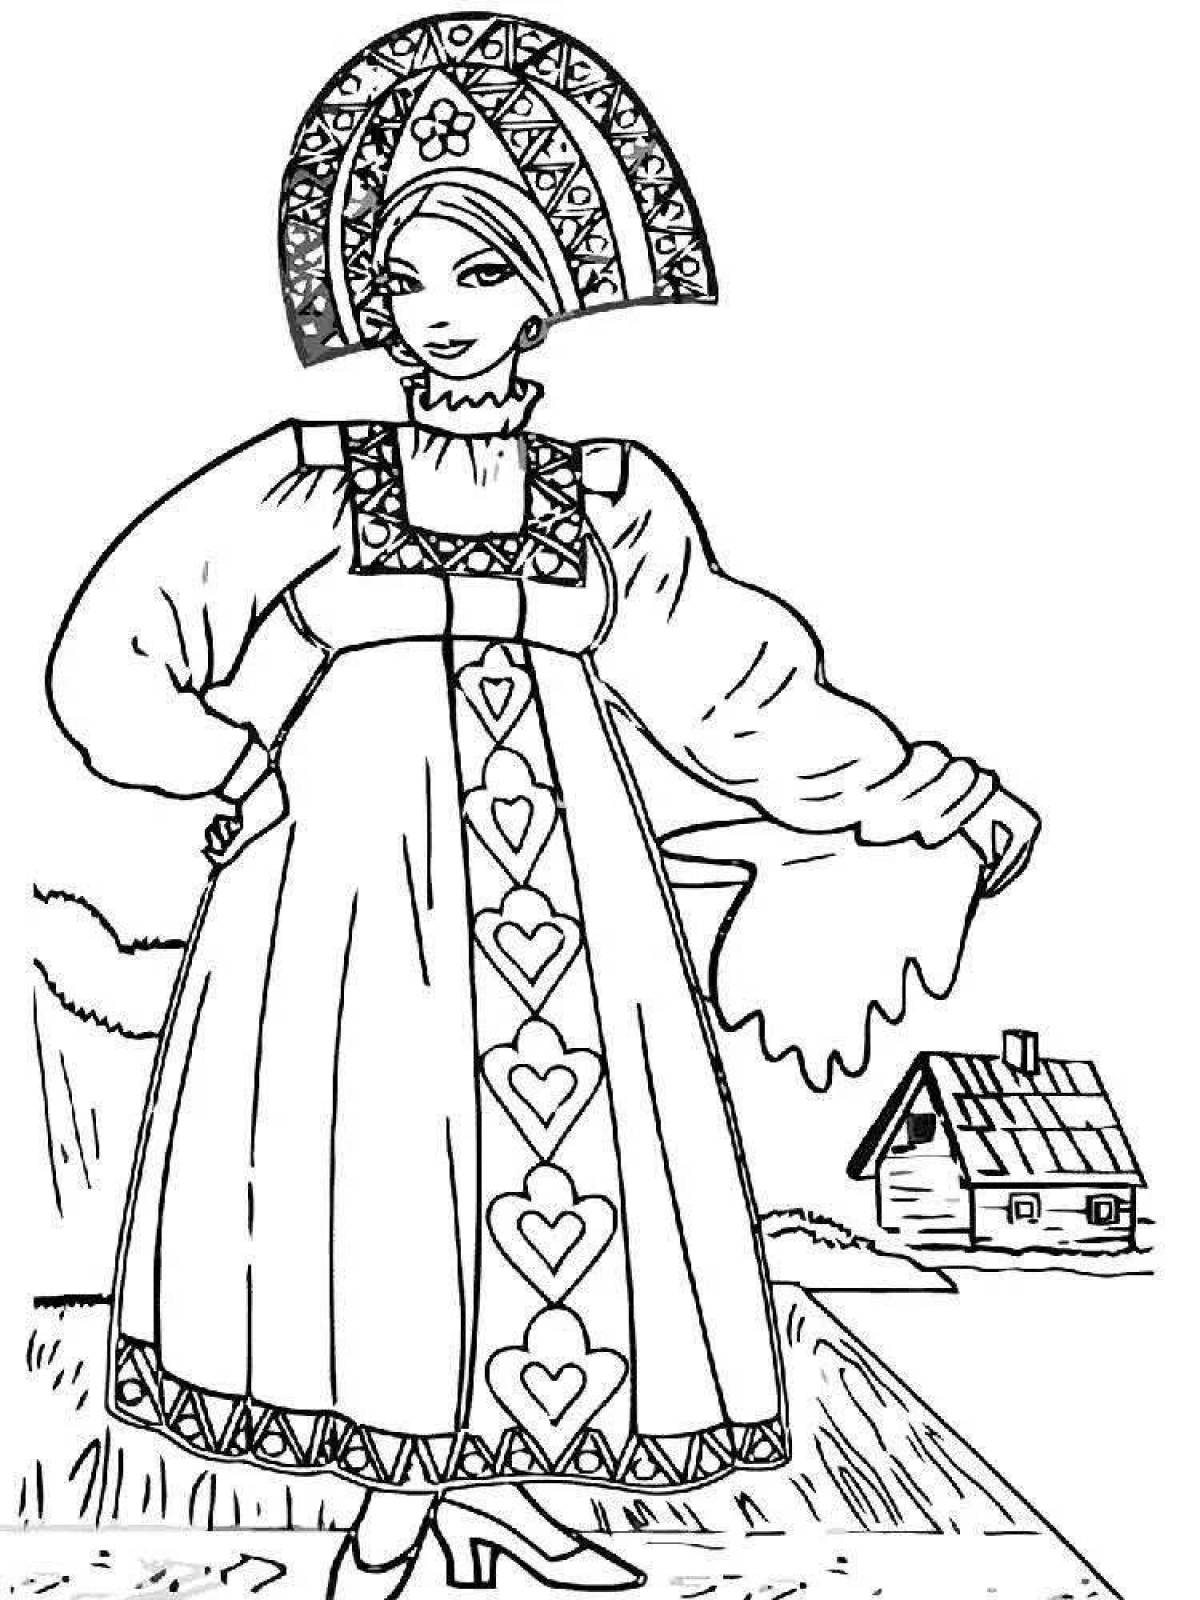 Colorful Russian folk clothes coloring book